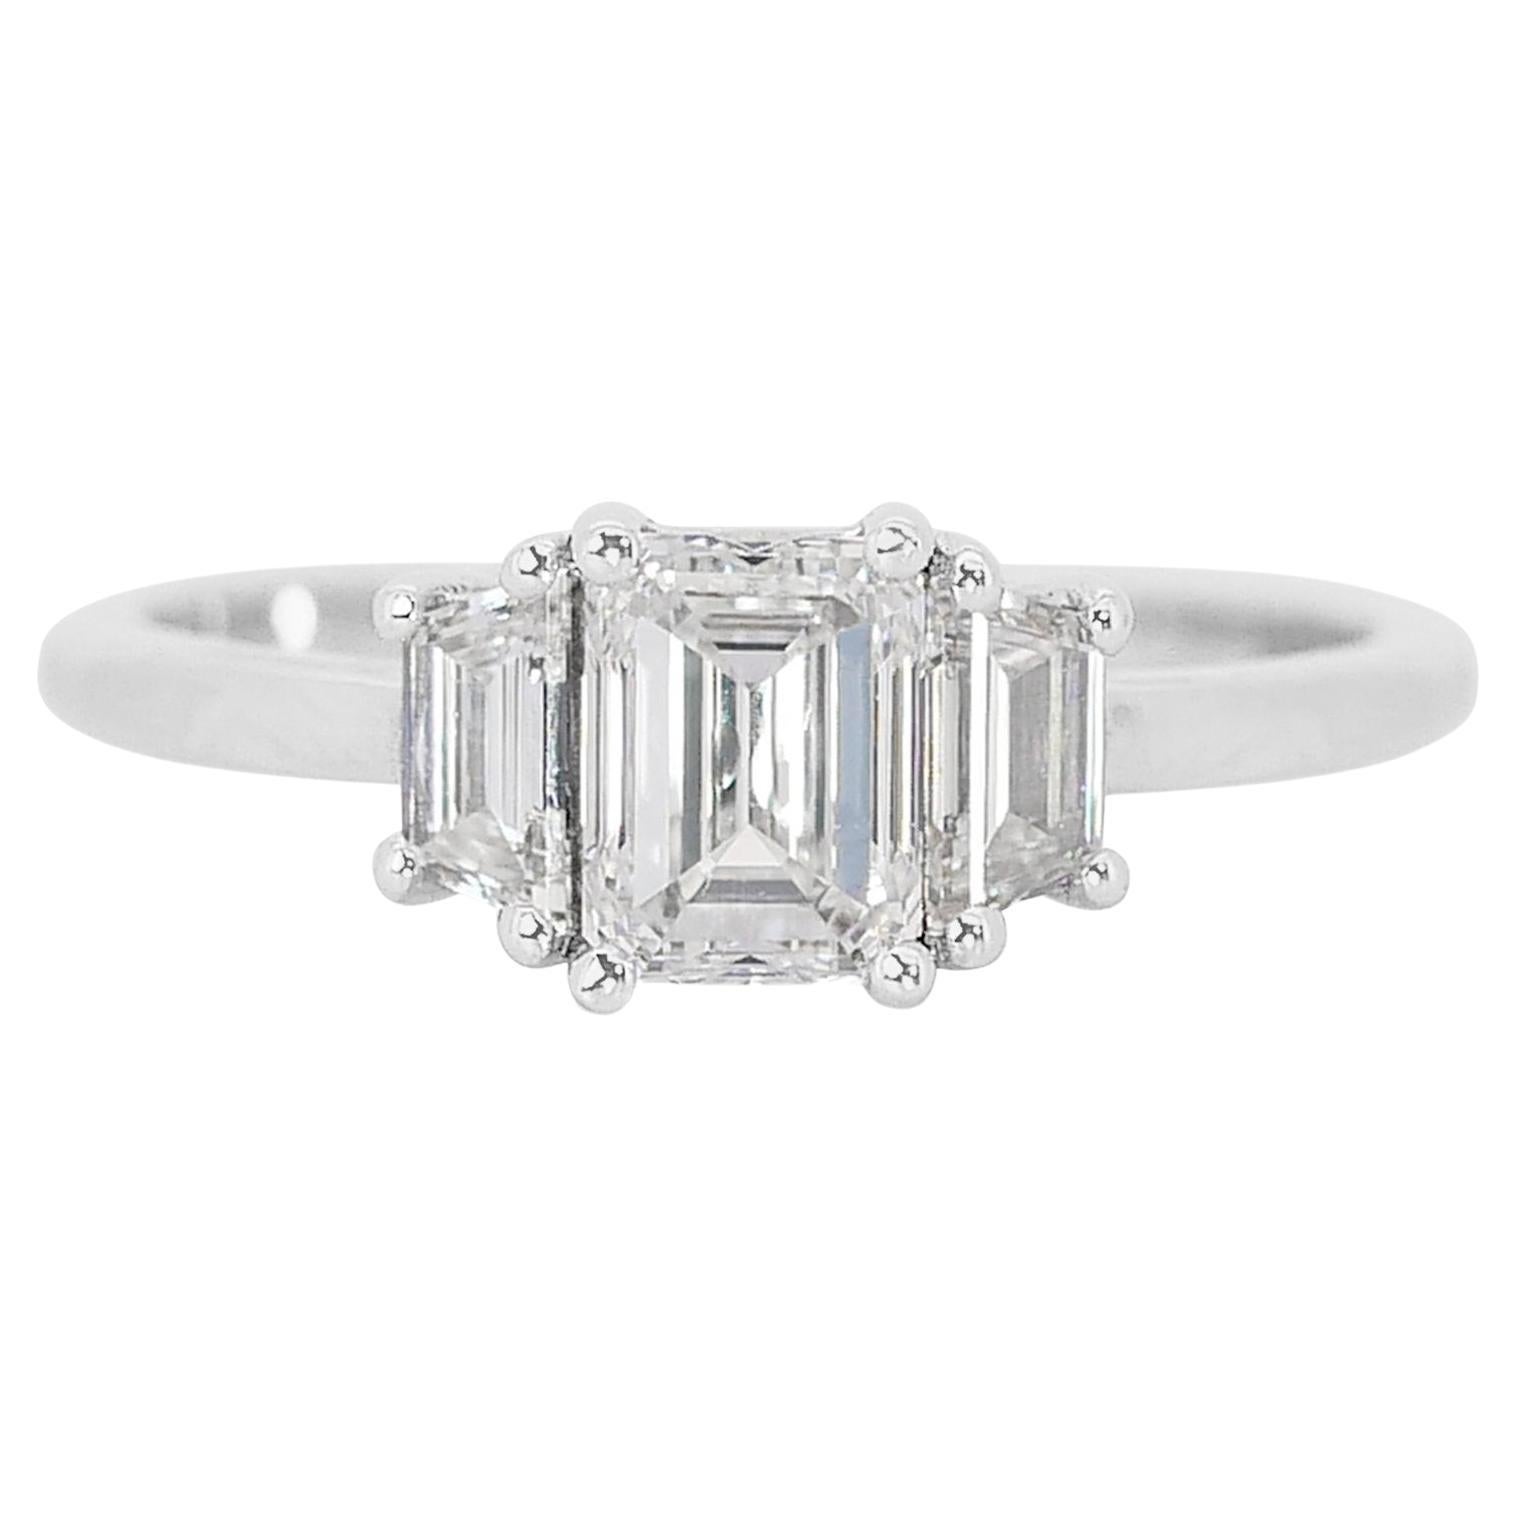 Magnificent 1.35ct Diamond 3-Stone Ring in 18k White Gold - GIA Certified For Sale